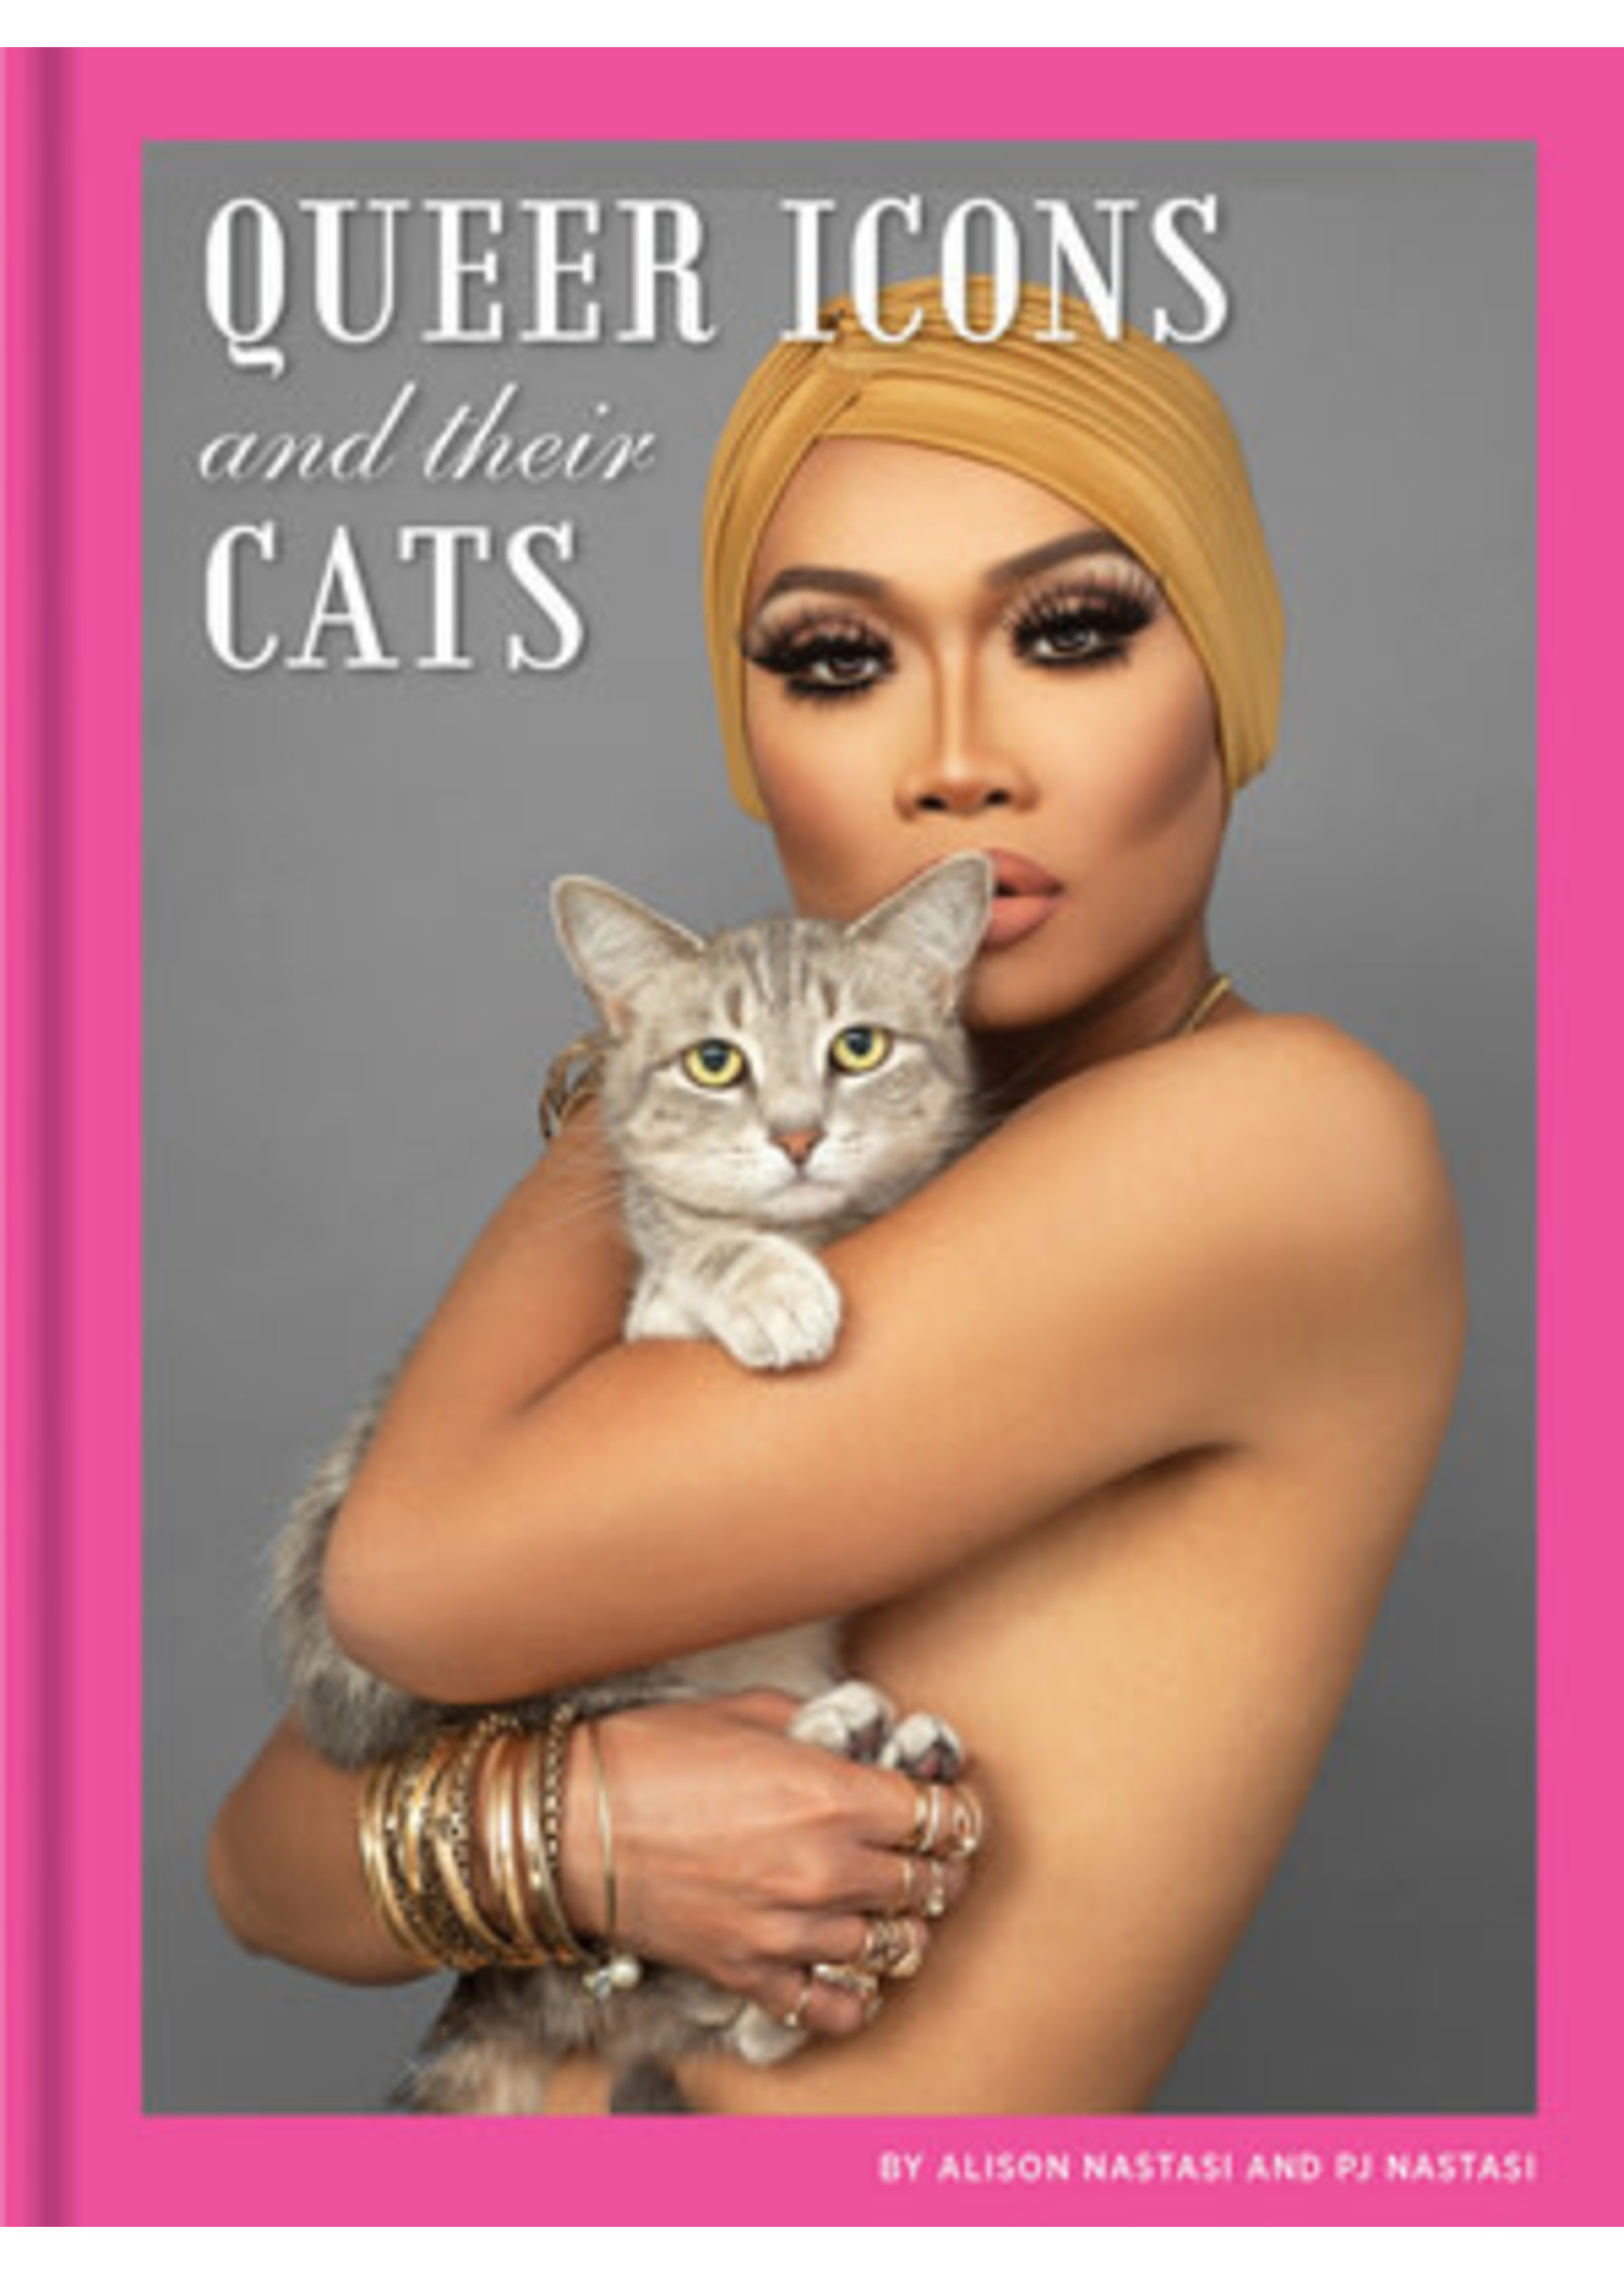 Queer Icons and Their Cats by Alison Nastasi,  P.J. Nastasi